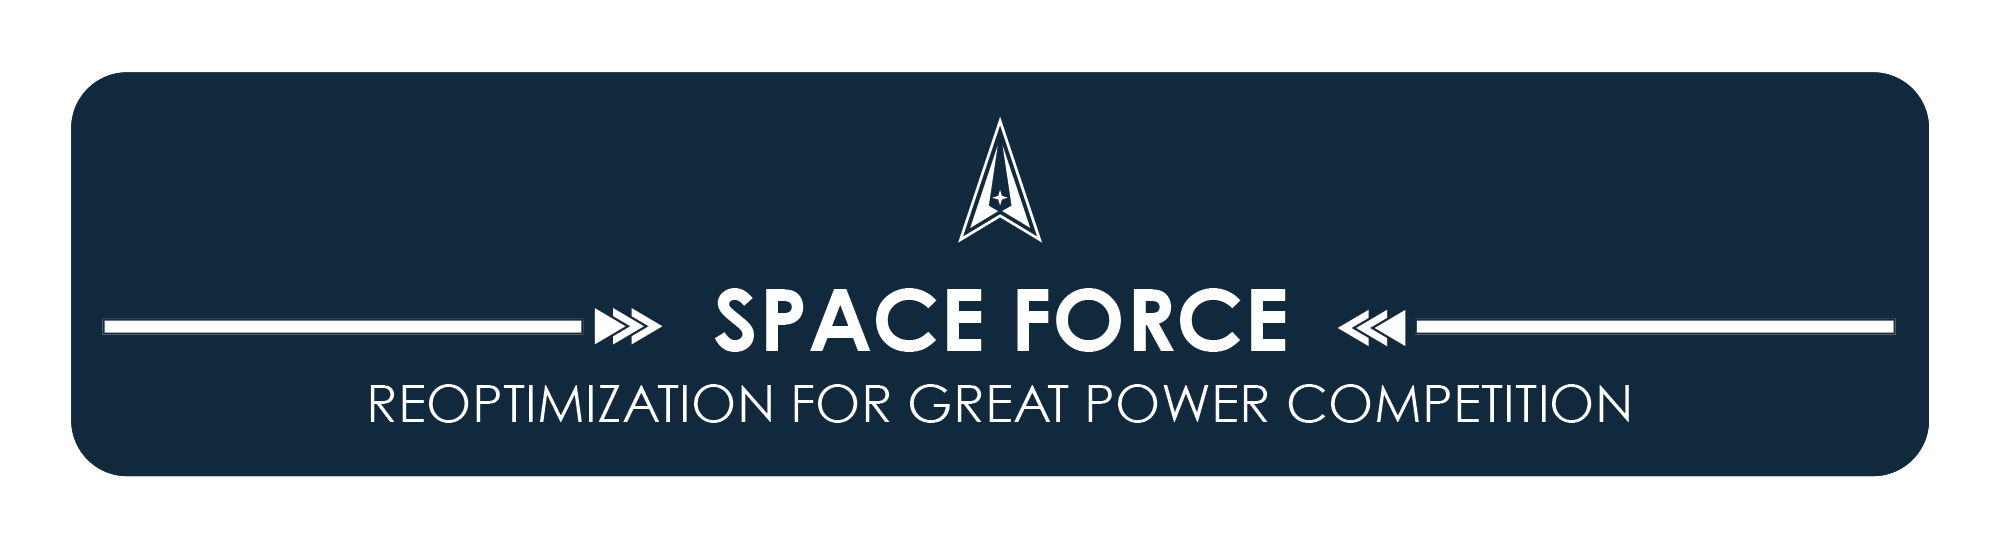 Space Force Great Power Competition